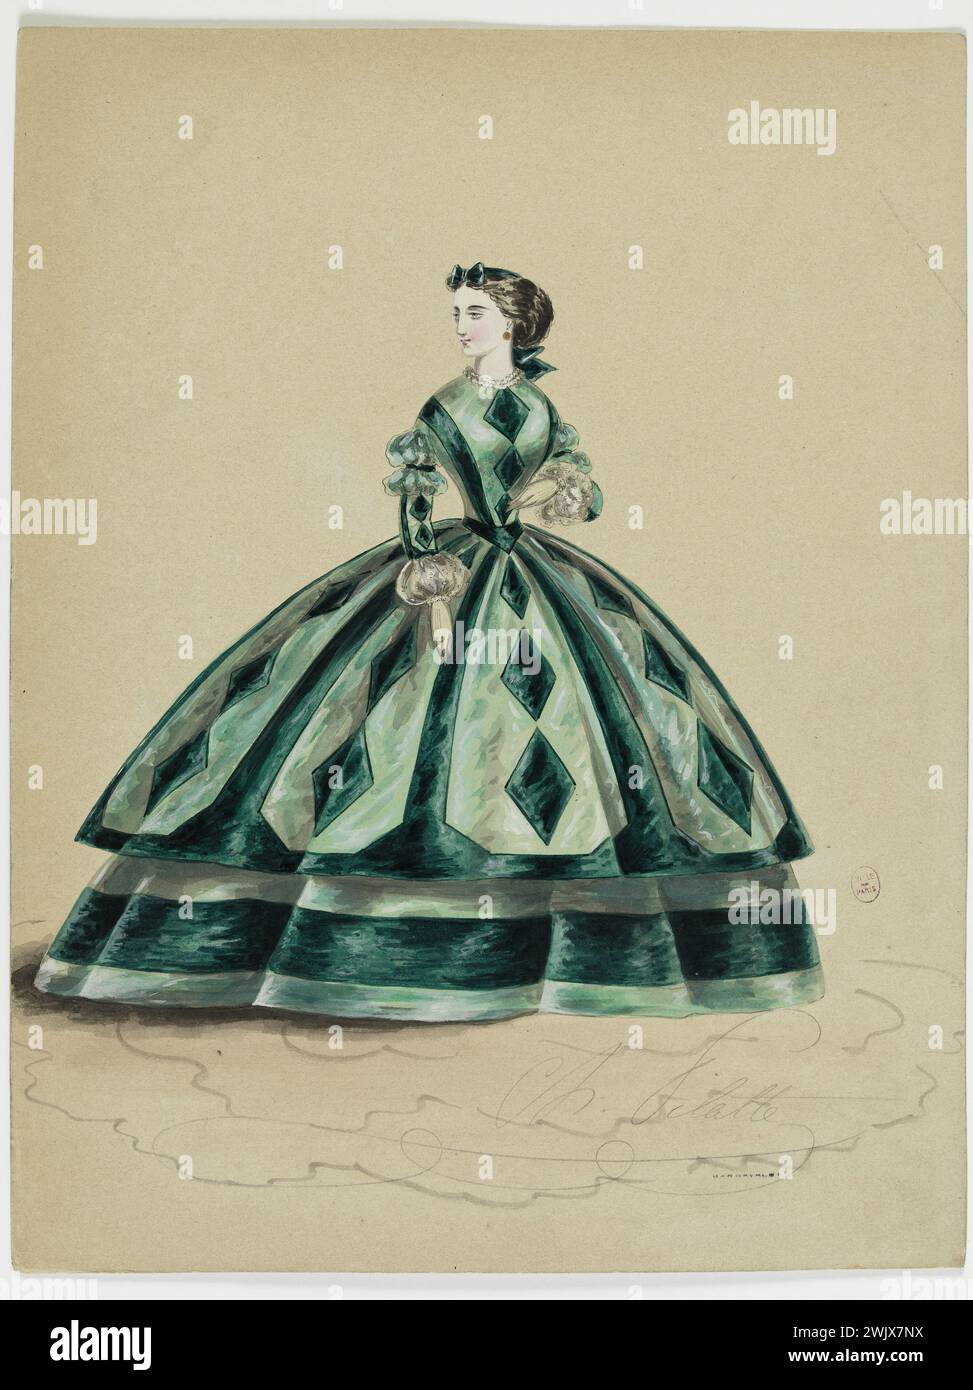 Charles Pilatte for the Ghys house. Model-figure for seamstress. Green town dress, decorated with darker green diamonds, corsage in a sleeve point, swollen cuffs on the wrist, Madame Ghys model. Watercolor on cardboard. 1860. Galliera, fashion museum of the city of Paris. 37796-1 Watercolor on Carton, album, Cursing in Pointe, Couturiere, Frisser, Young Woman, Dark Losange, Ghys house, Cuff, Moquette-Figure, Green City Dress, Second Empire Stock Photo